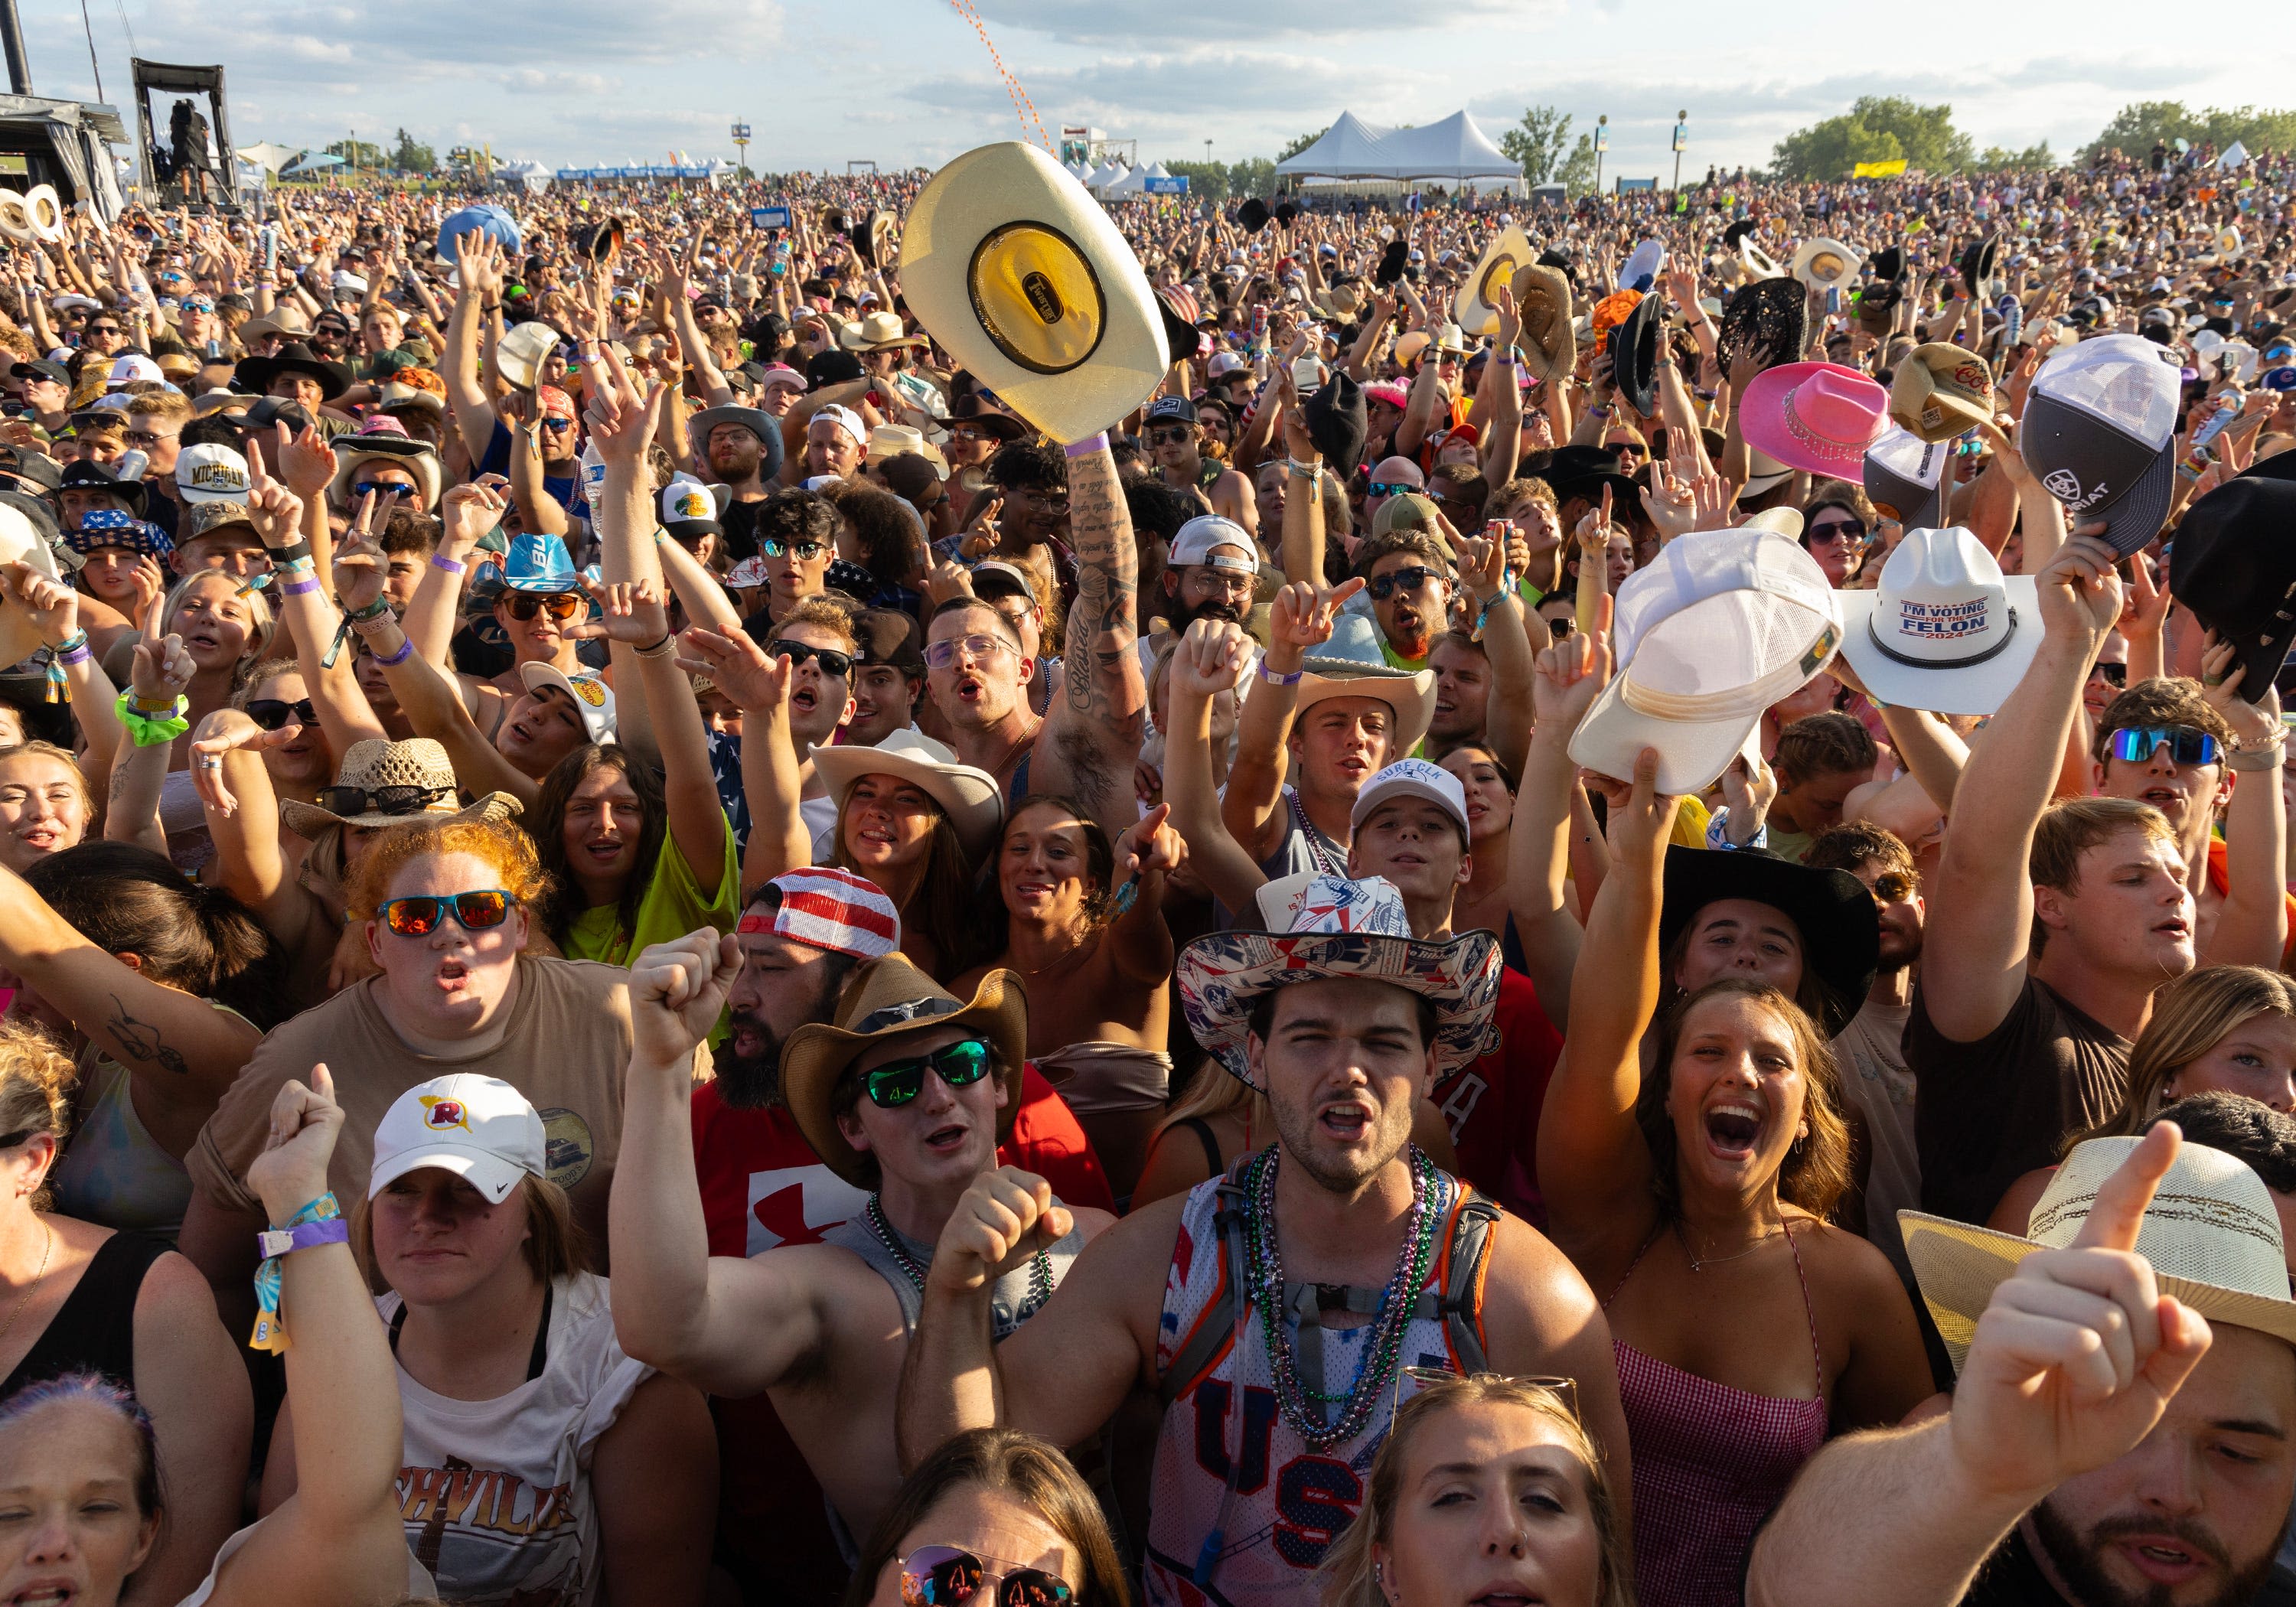 Country music fest Faster Horses draws tens of thousands to Michigan International Speedway